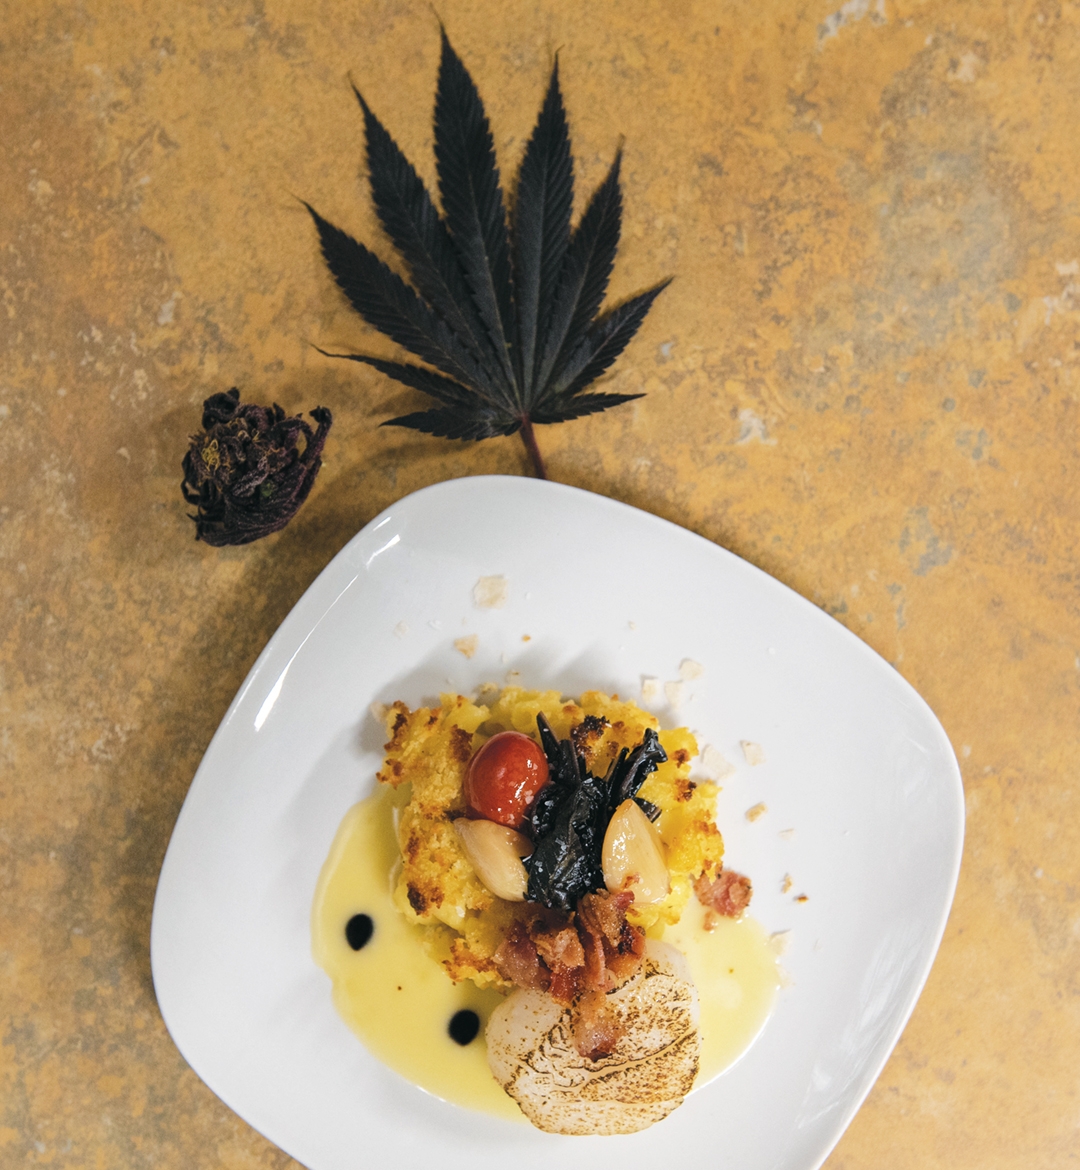 Beyond Brownies: Michigan Cannabis Chefs specialize in high-end, pot-infused dishes